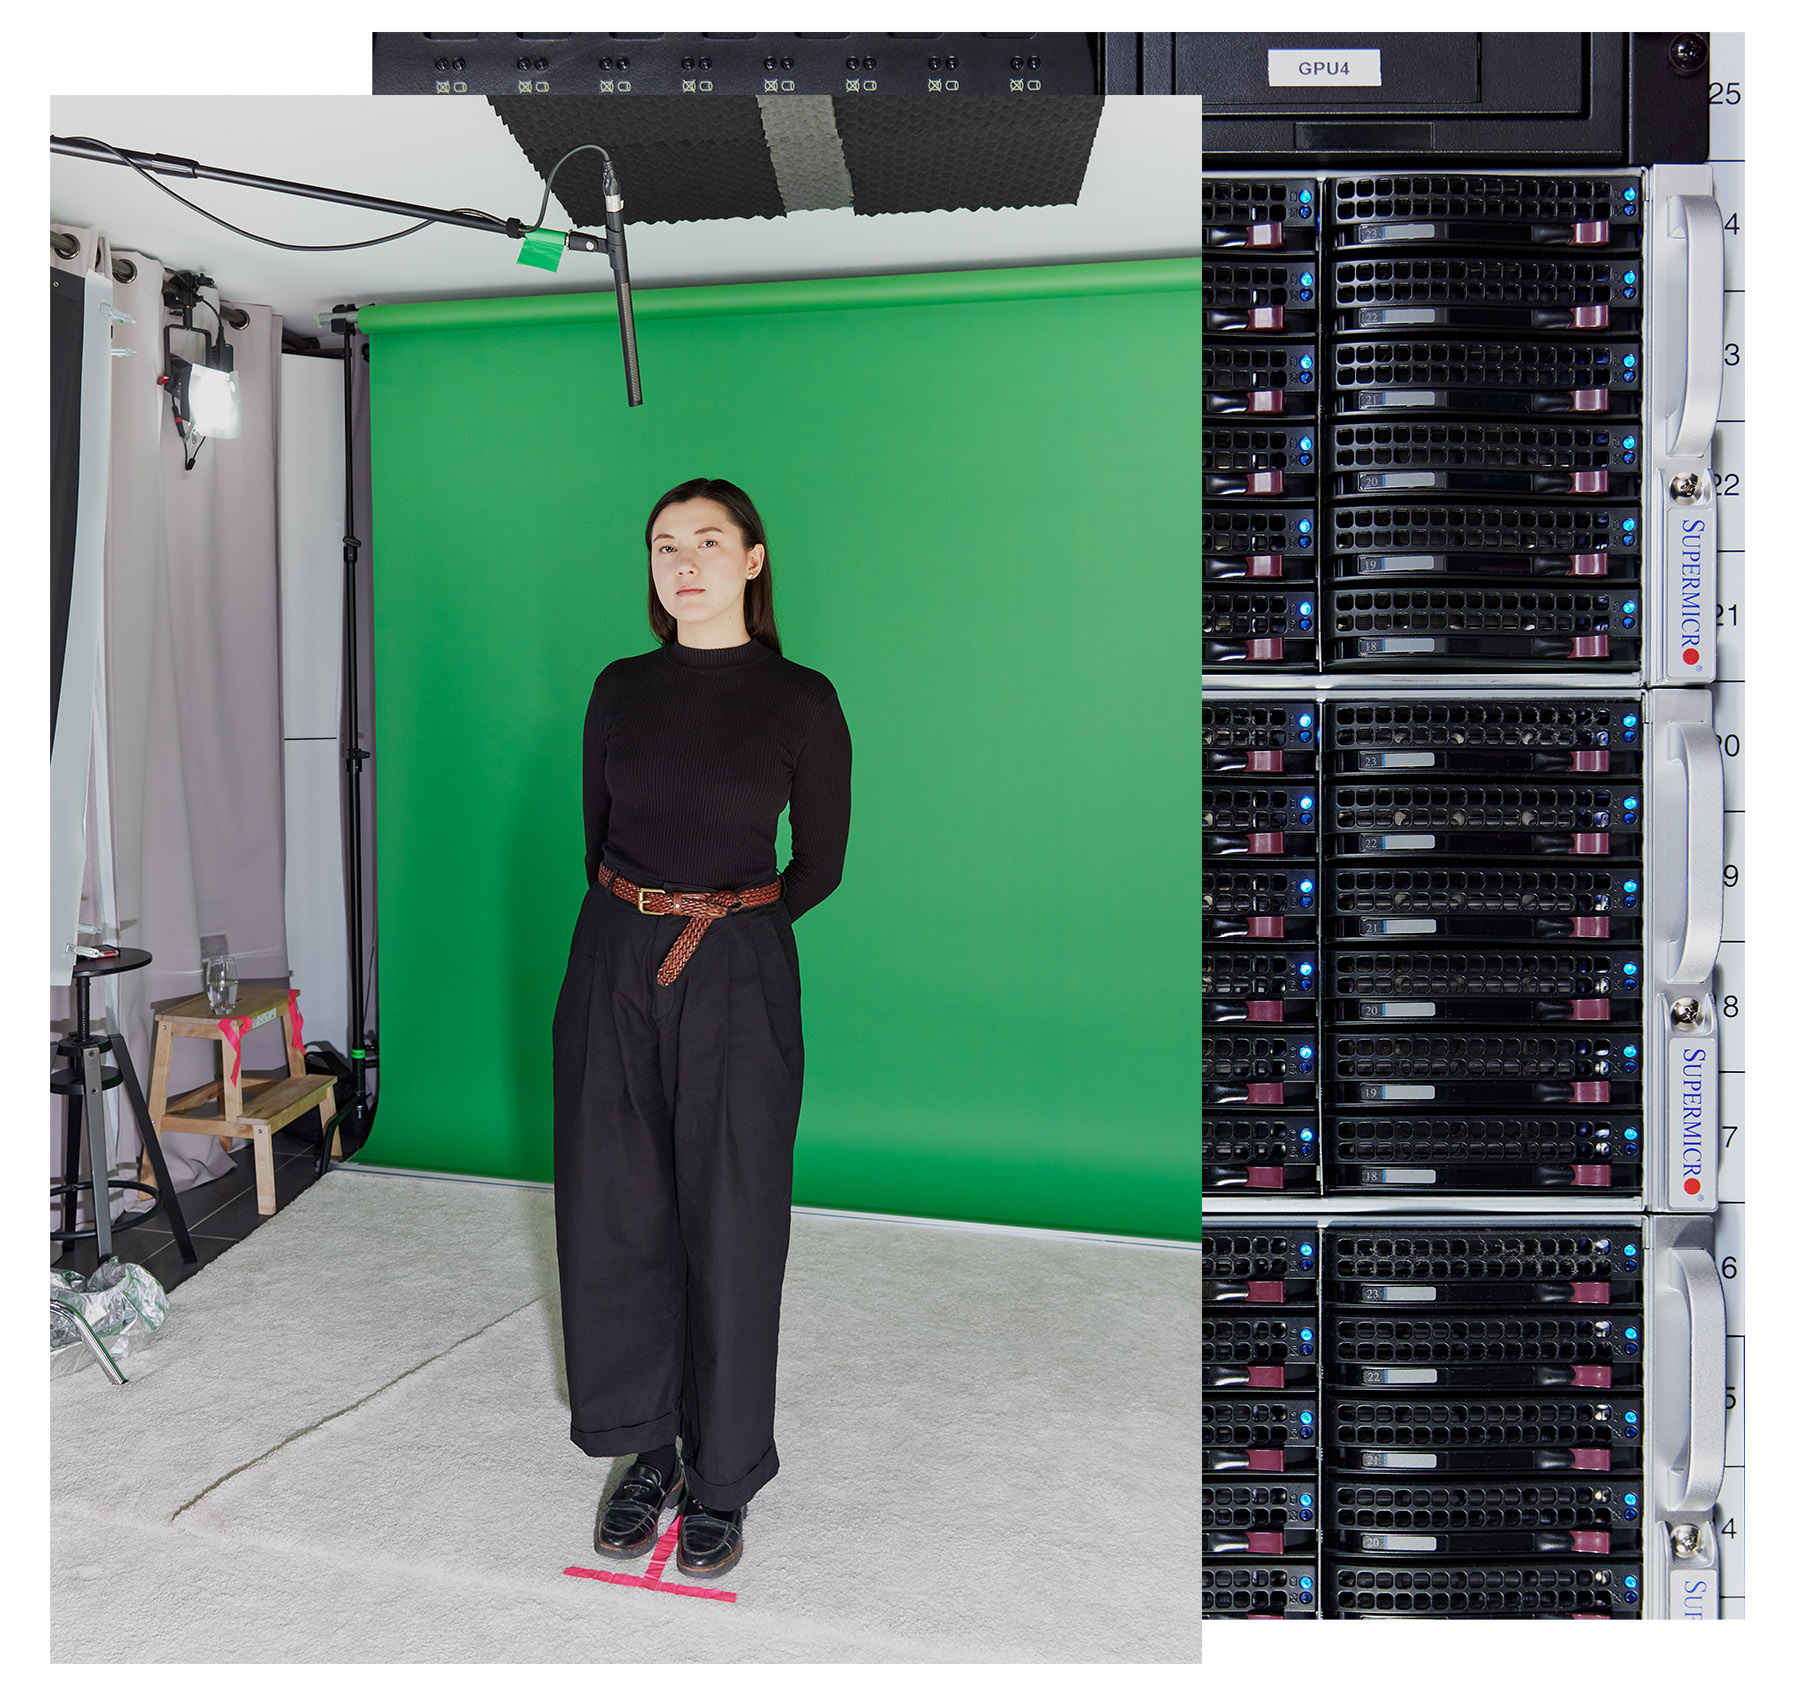 Image of Melissa standing in front of a green screen with server racks in the background